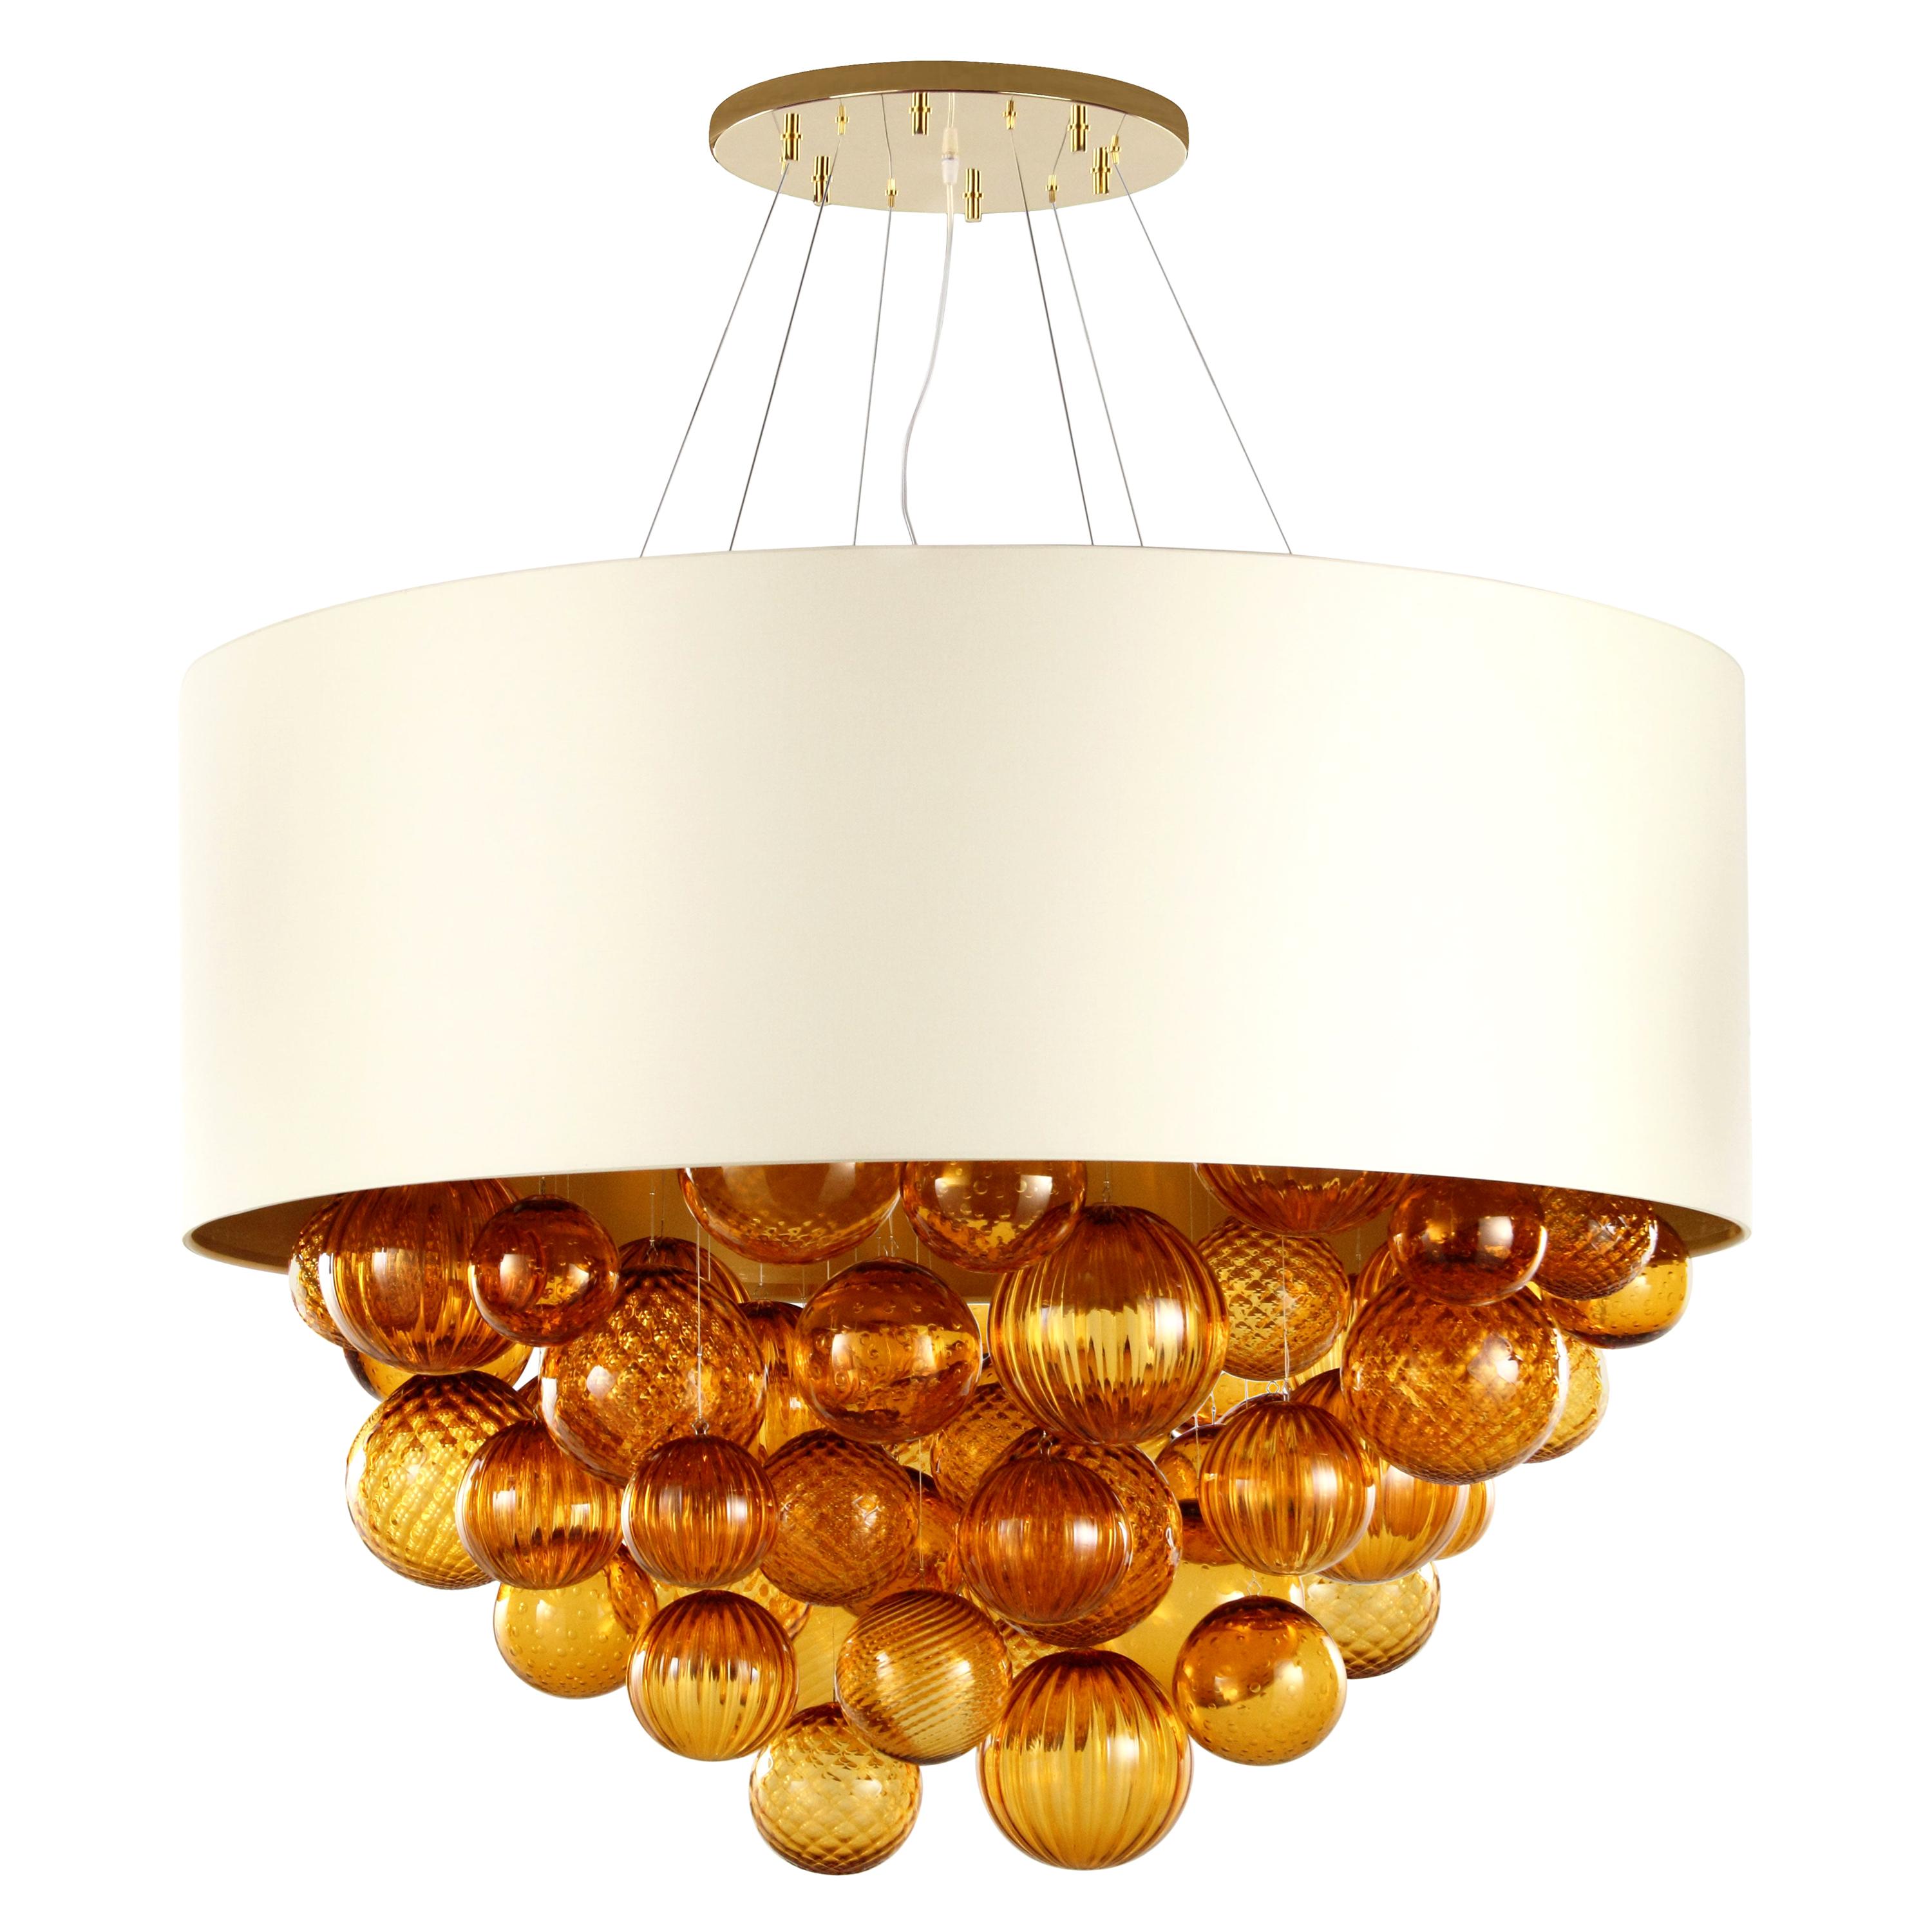 Large Artistic Suspension Lamp Amber Murano Glass, ivory Lampshade by Multiforme